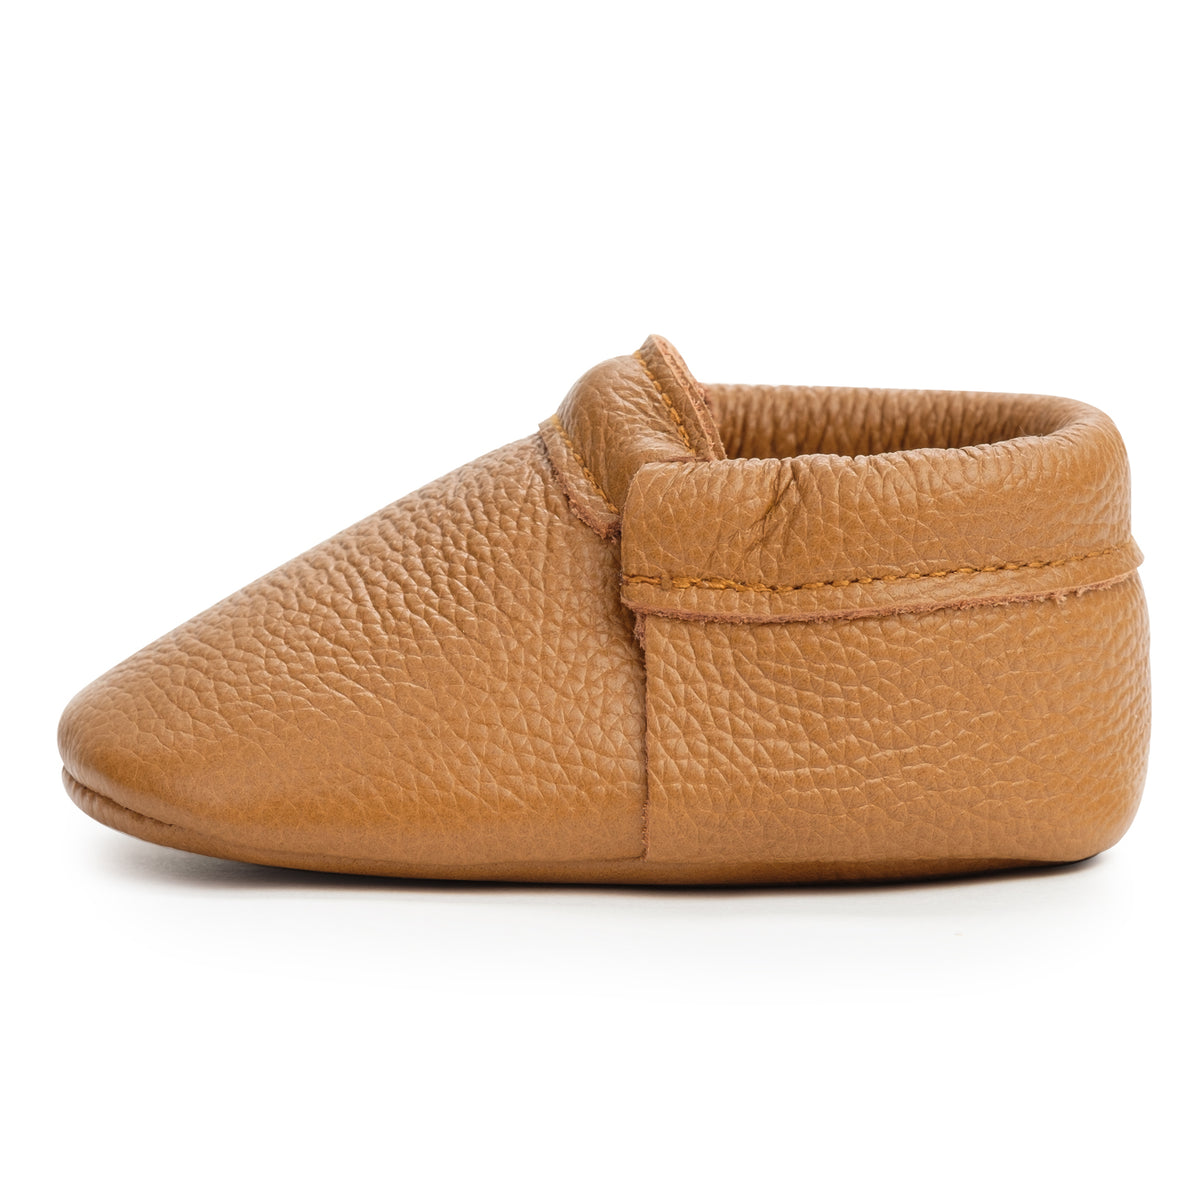 Classic Brown Fringeless Moccasins